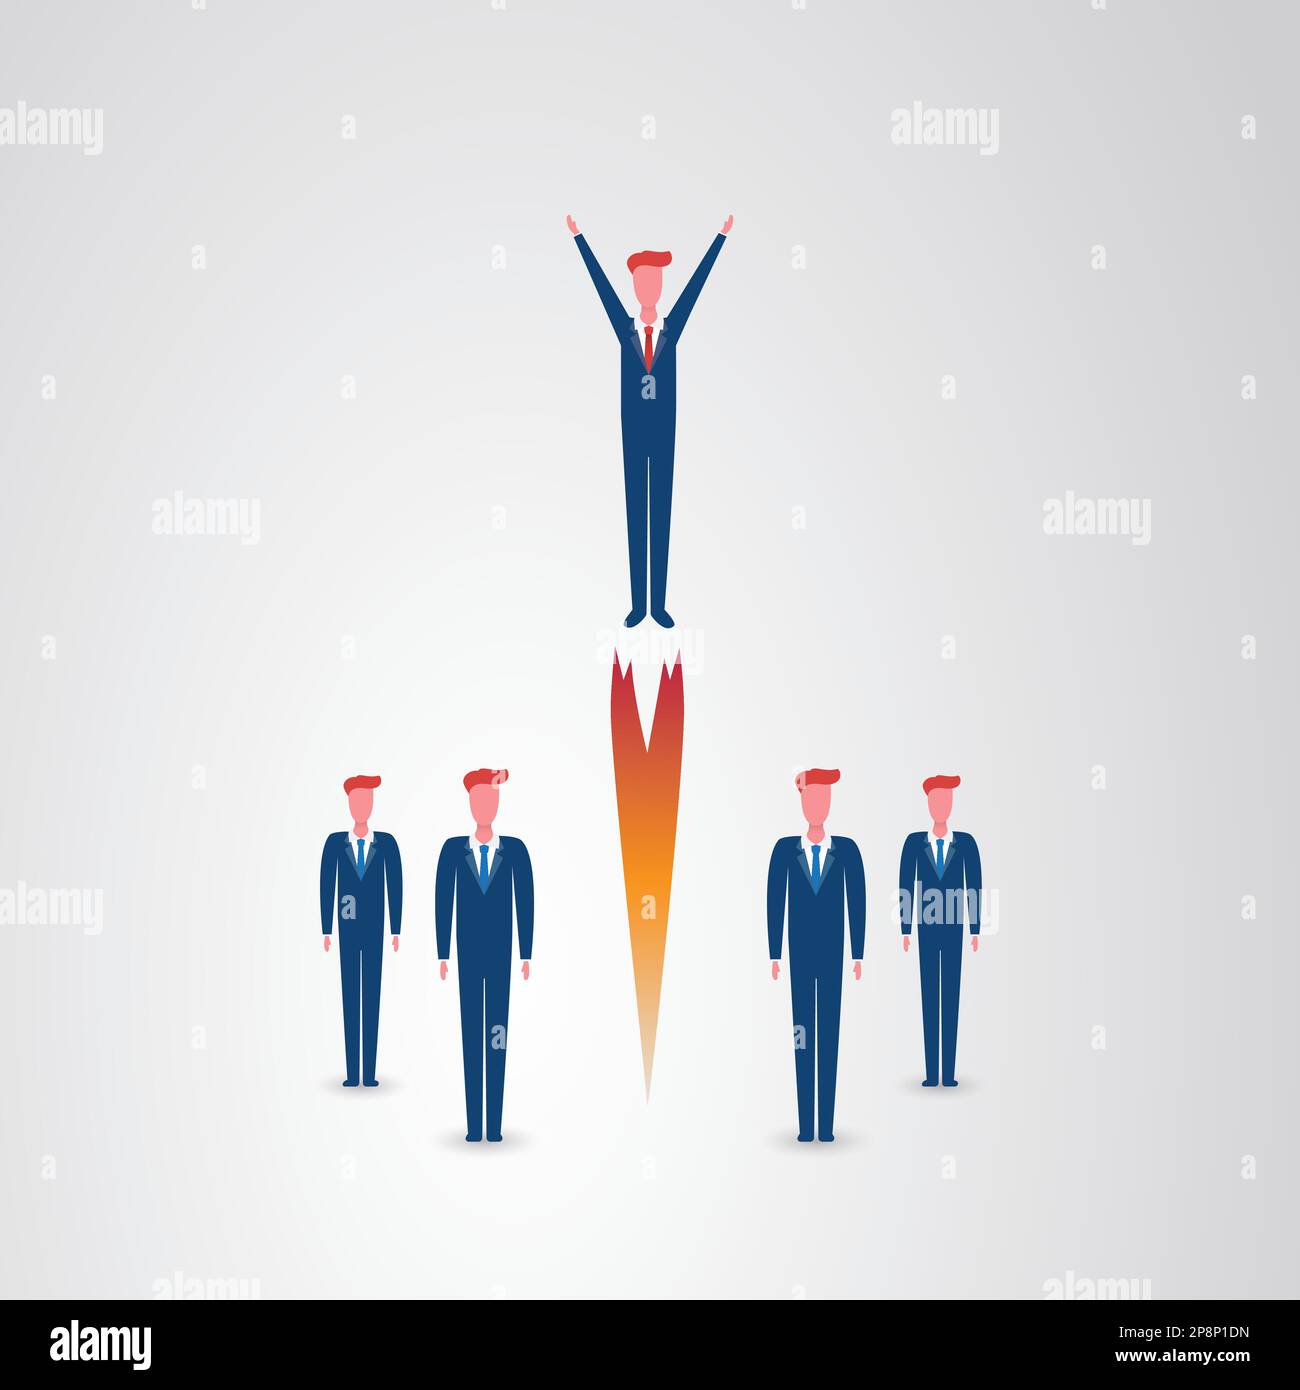 Boost Your Career - Career Development Design Concept with Businessman Flying High Stock Vector